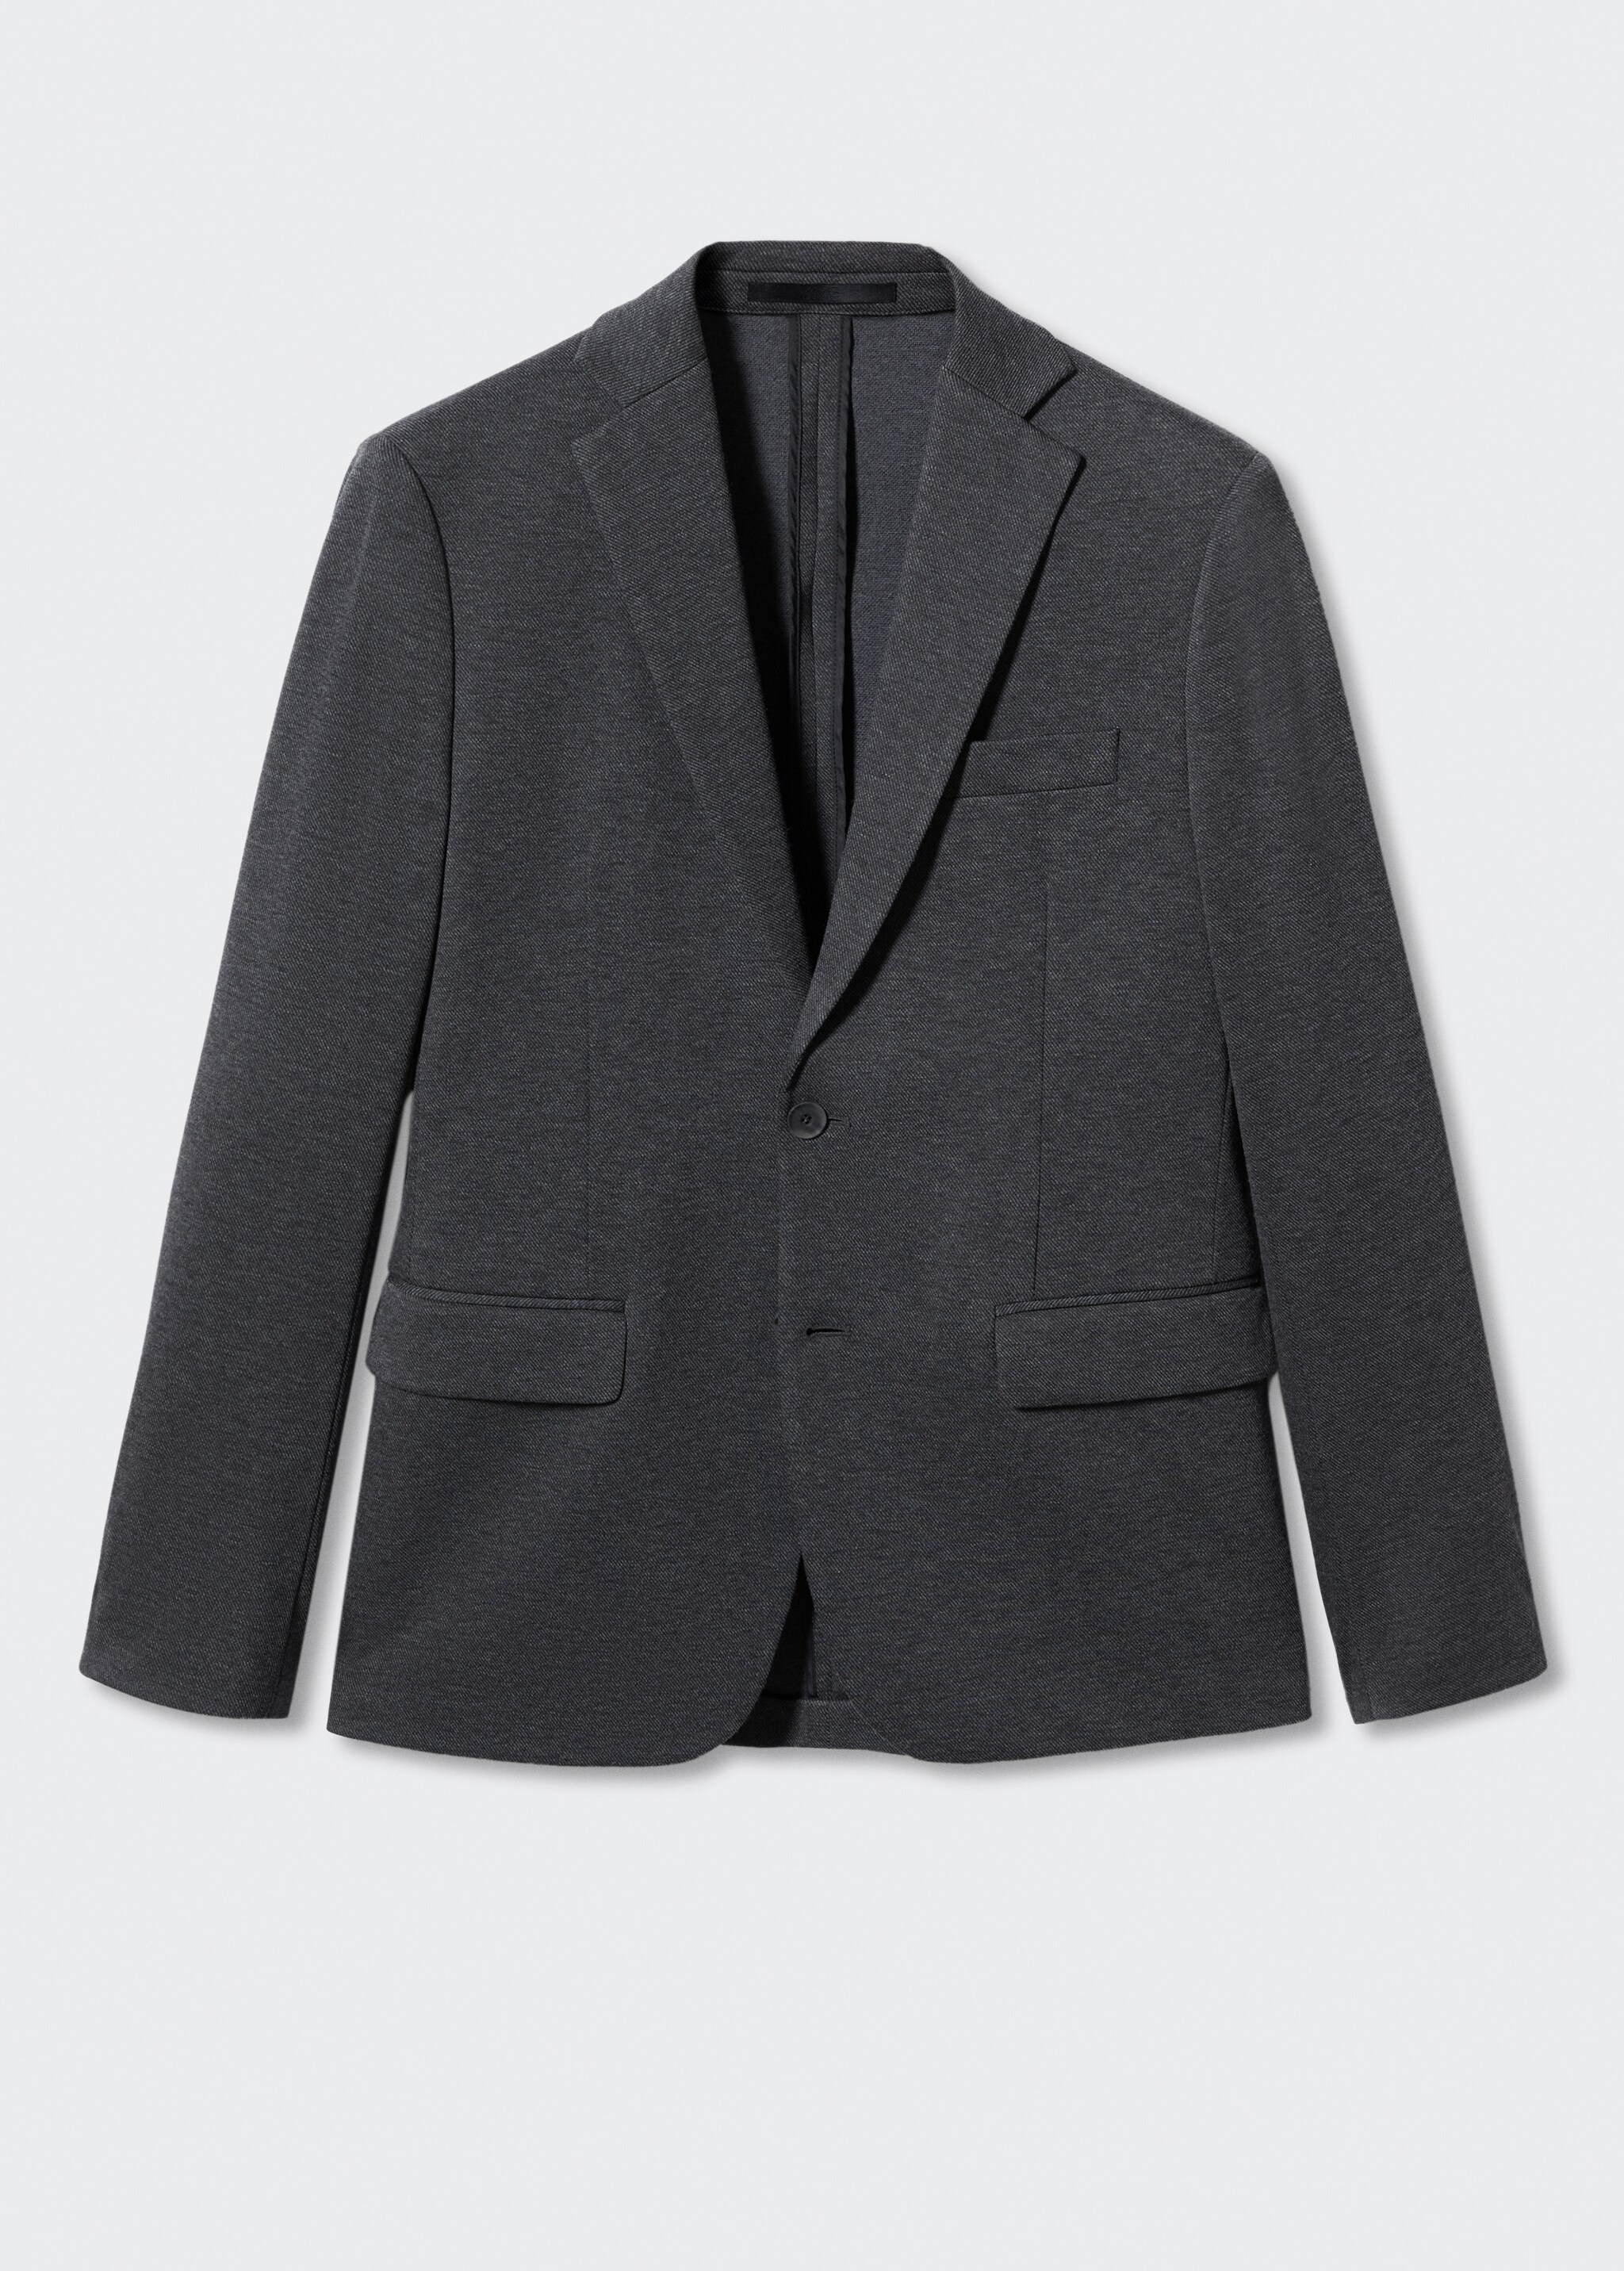 Slim fit microstructure blazer - Article without model